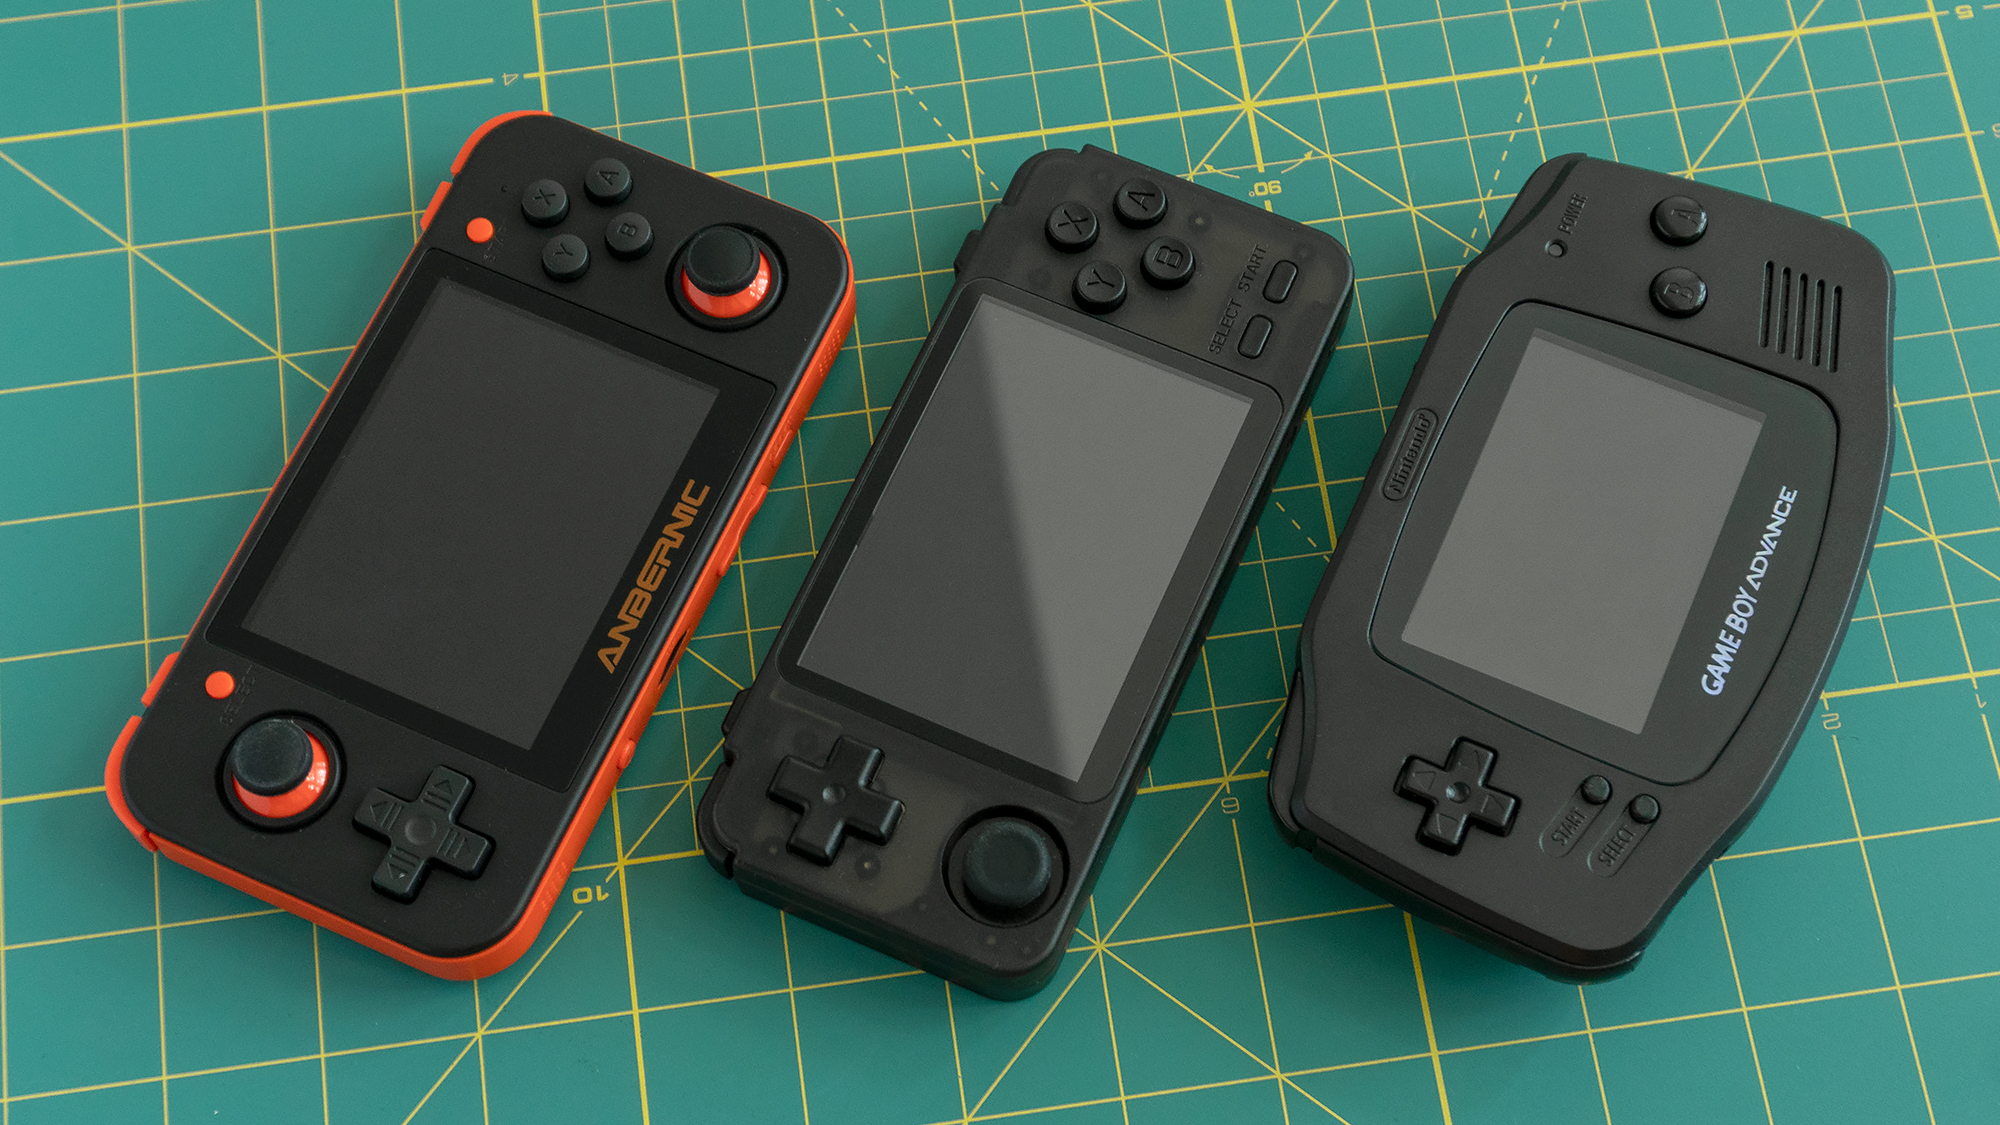 The RK2020 (middle) hits a sweet spot in terms of size between the RG350 (left) and the original Nintendo Game Boy Advance (right). (Photo: Andrew Liszewski - Gizmodo)